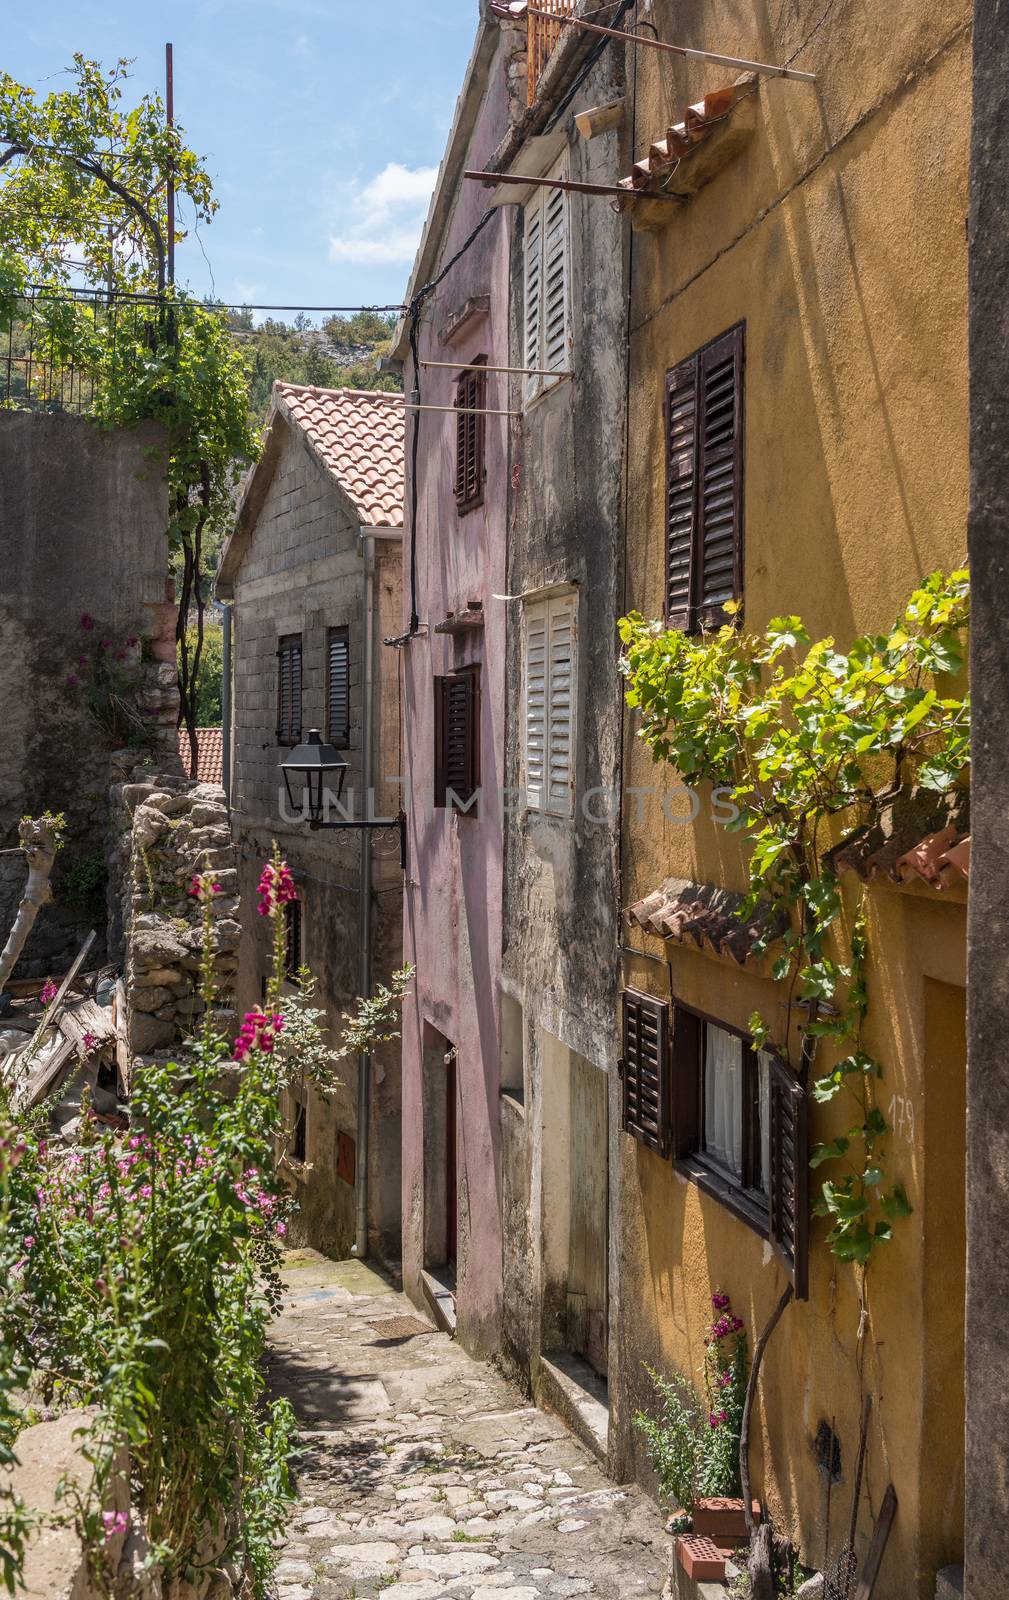 Narrow street with rustic houses and homes in the coastal town of Novigrad in Croatia